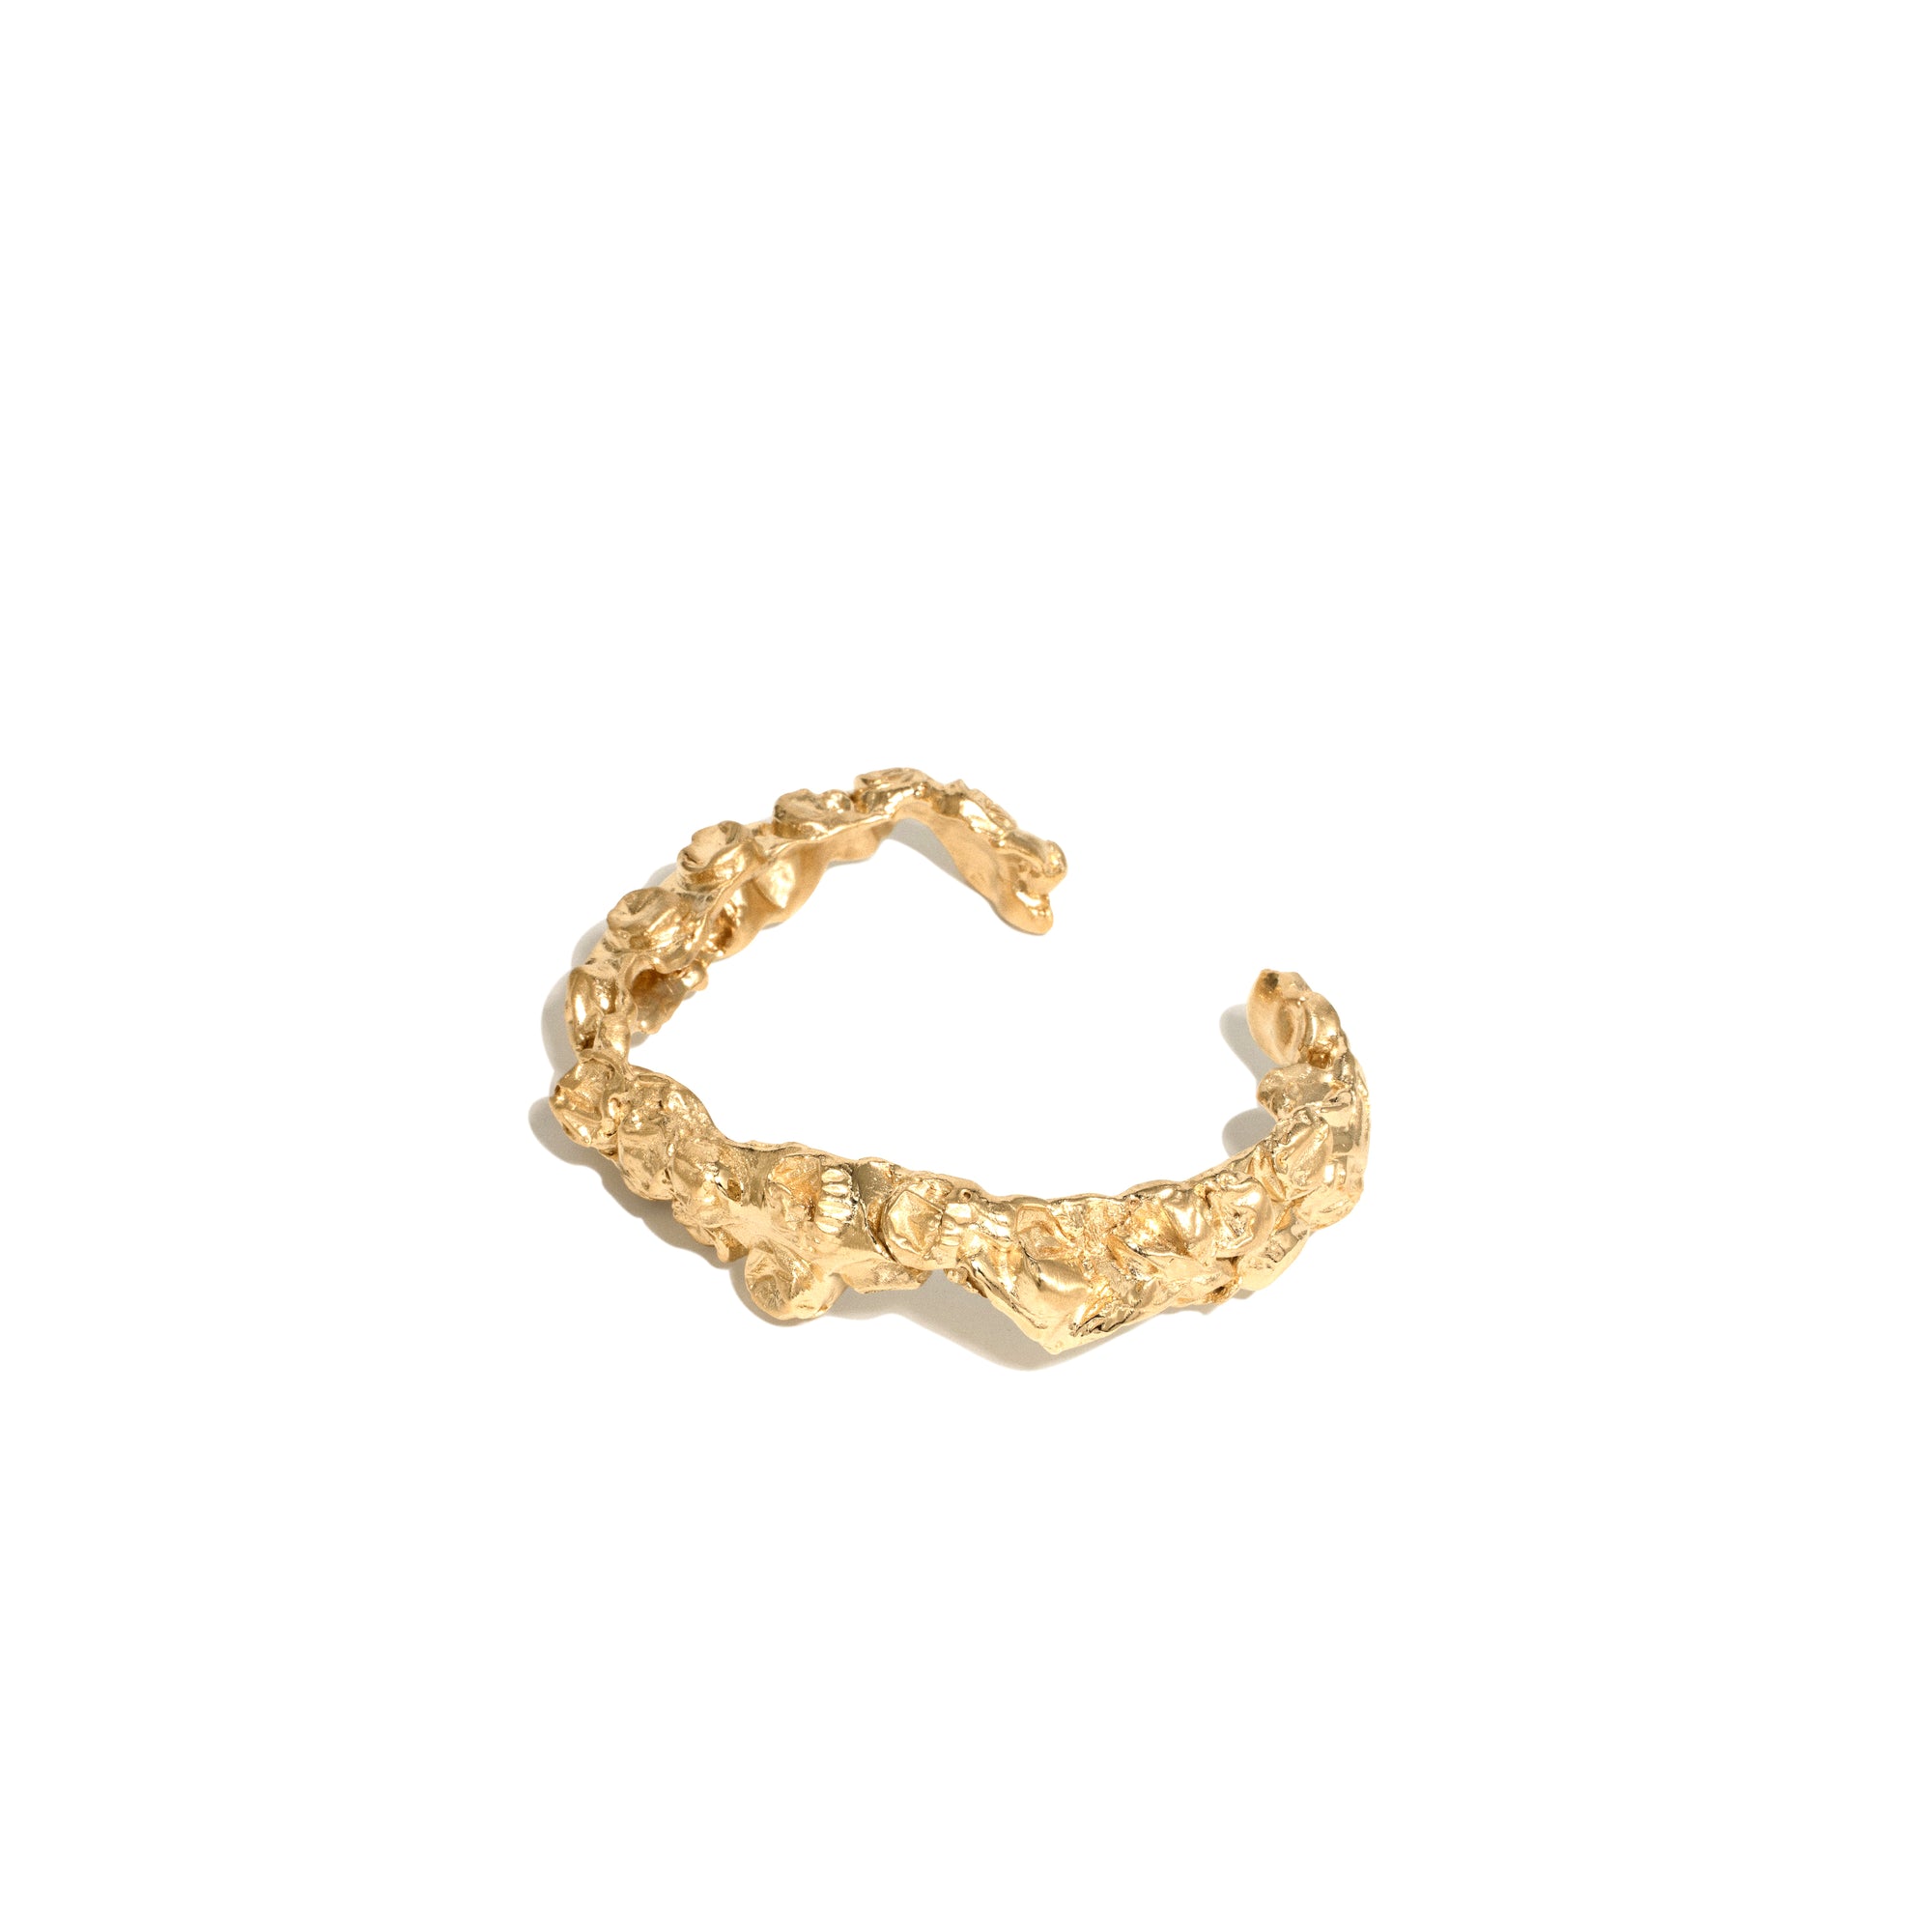 Completedworks - The Bubble To End All Bubbles Bracelet - (Gold) view 2